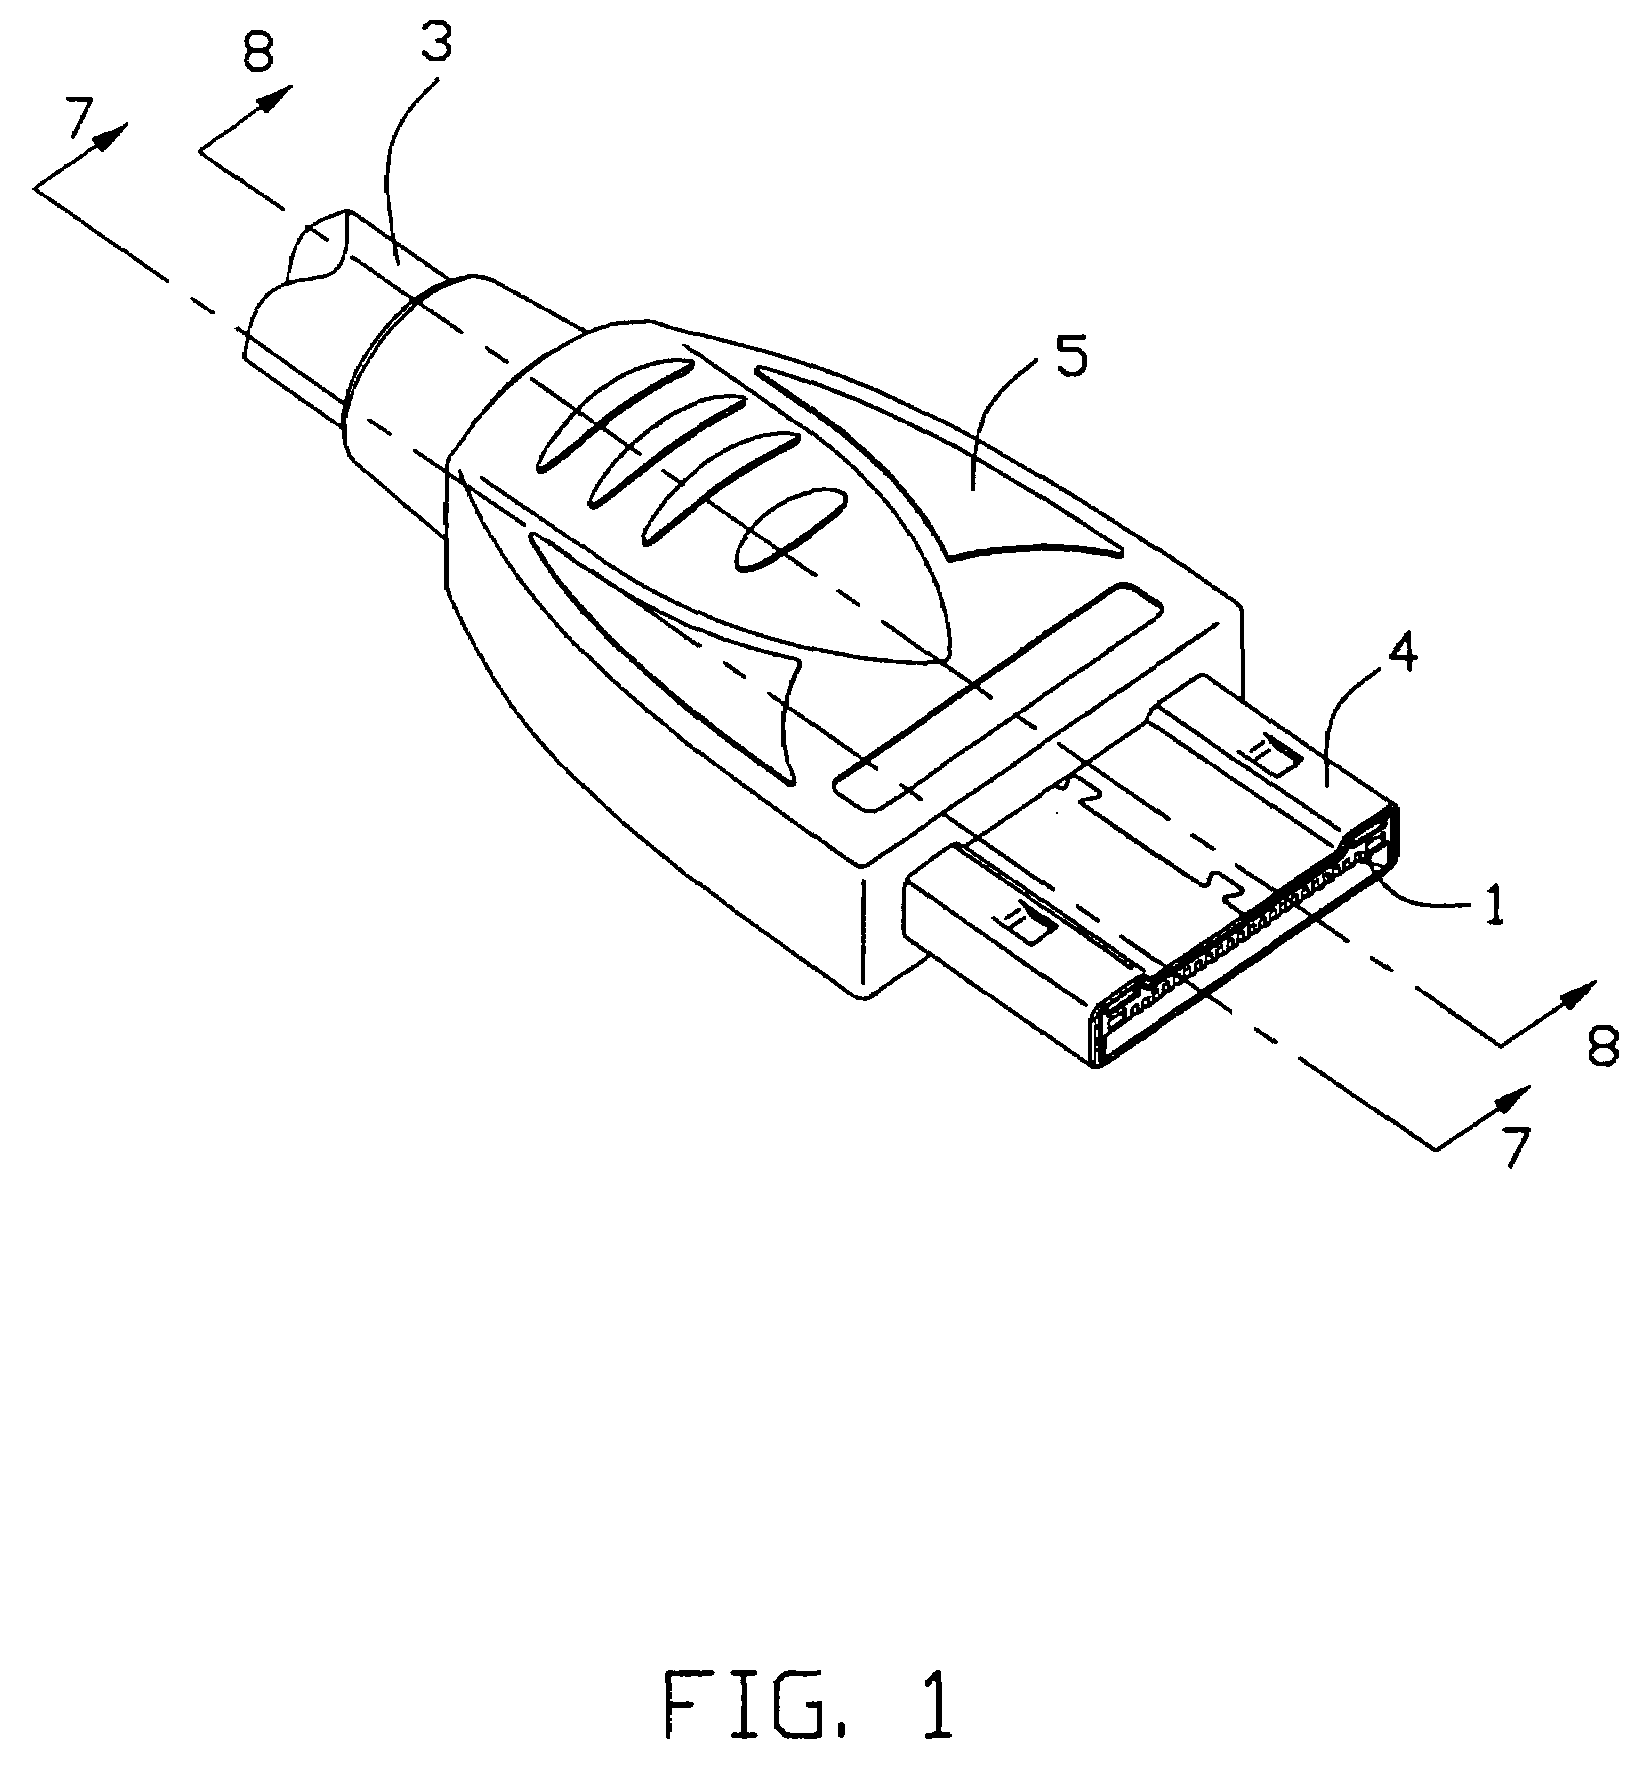 Electrical connector assembly with reduced crosstalk and electromaganetic interference